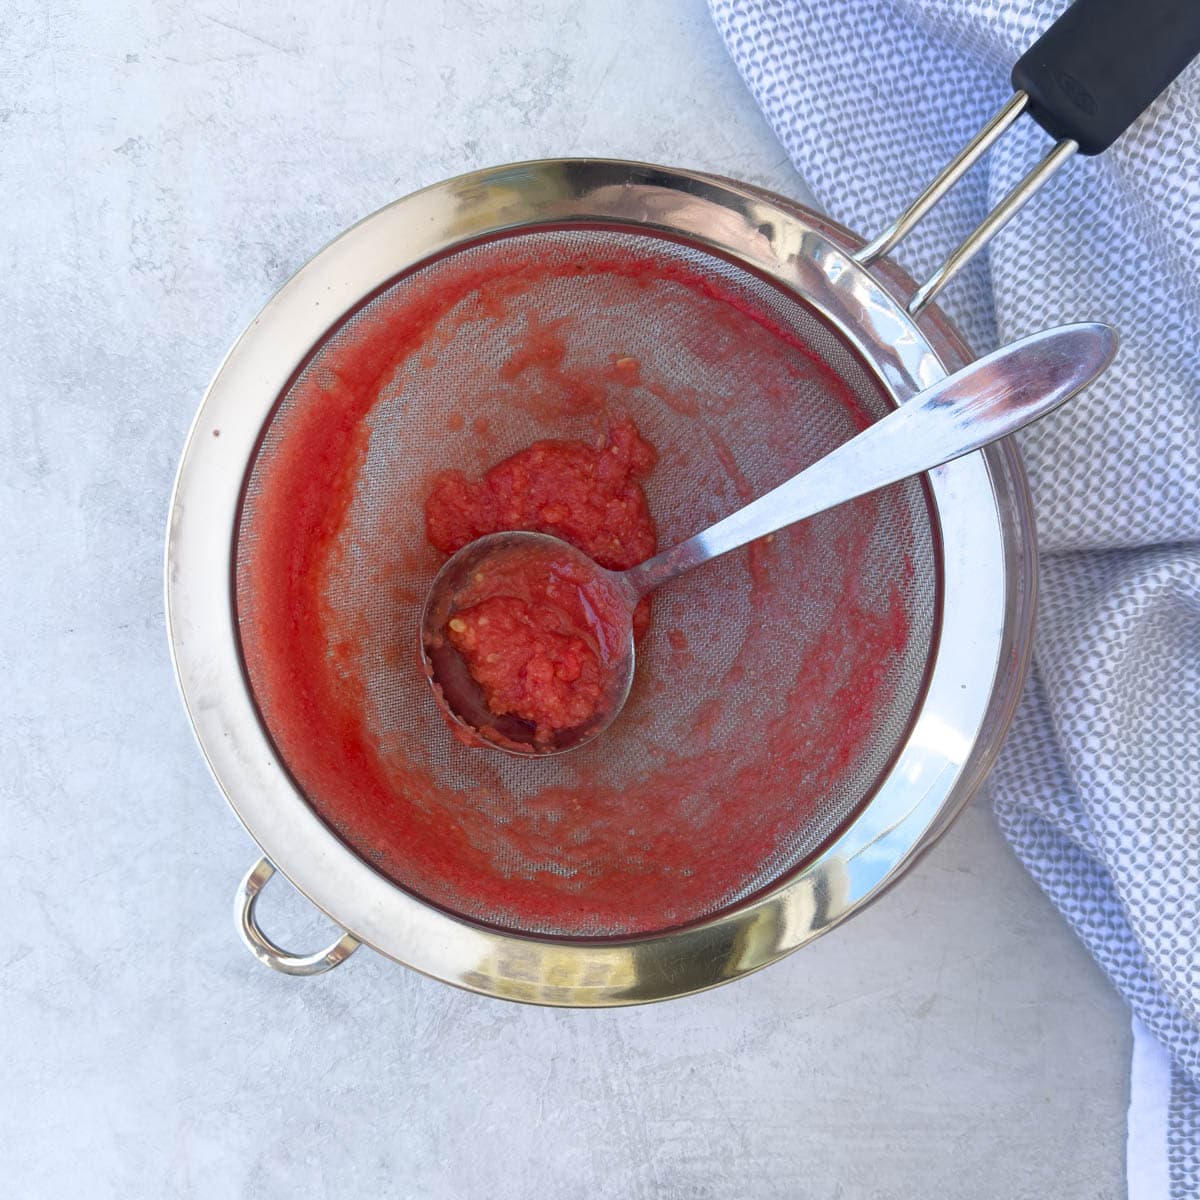 Watermelon pulp in a stainless steel strainer with a ladle.